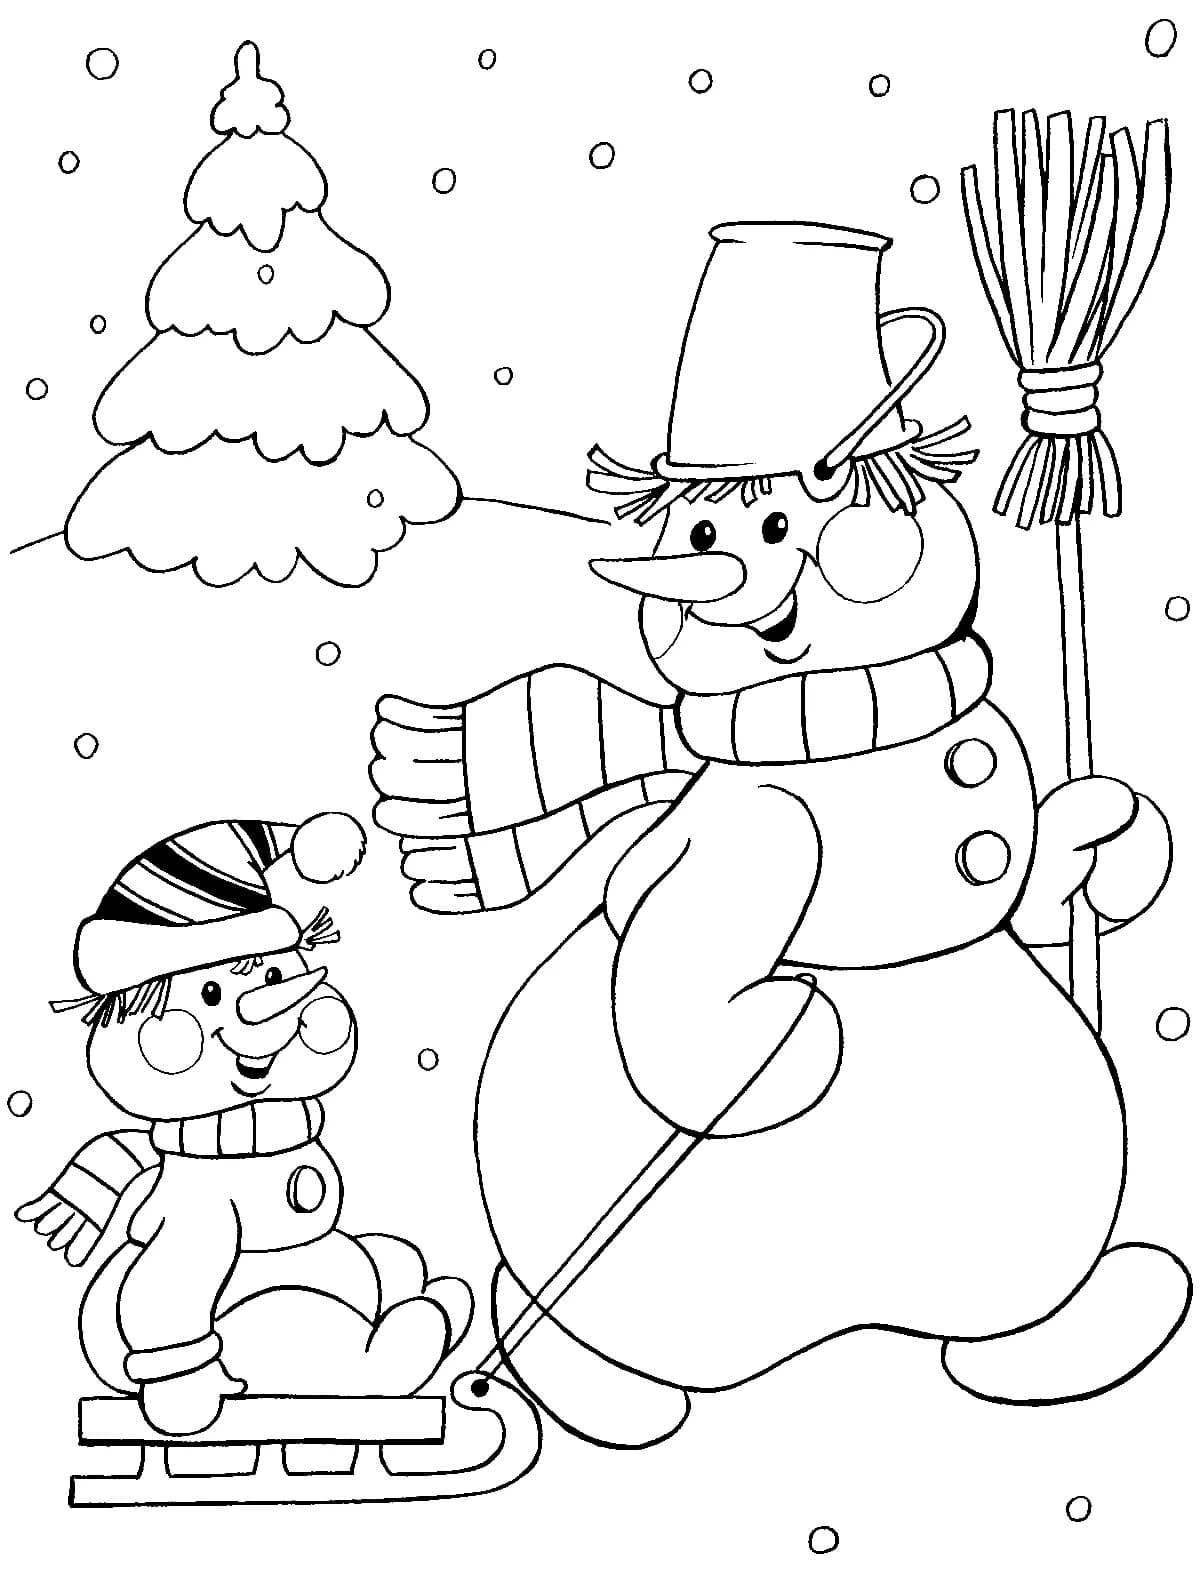 Crazy snowman coloring book for kids 3 4